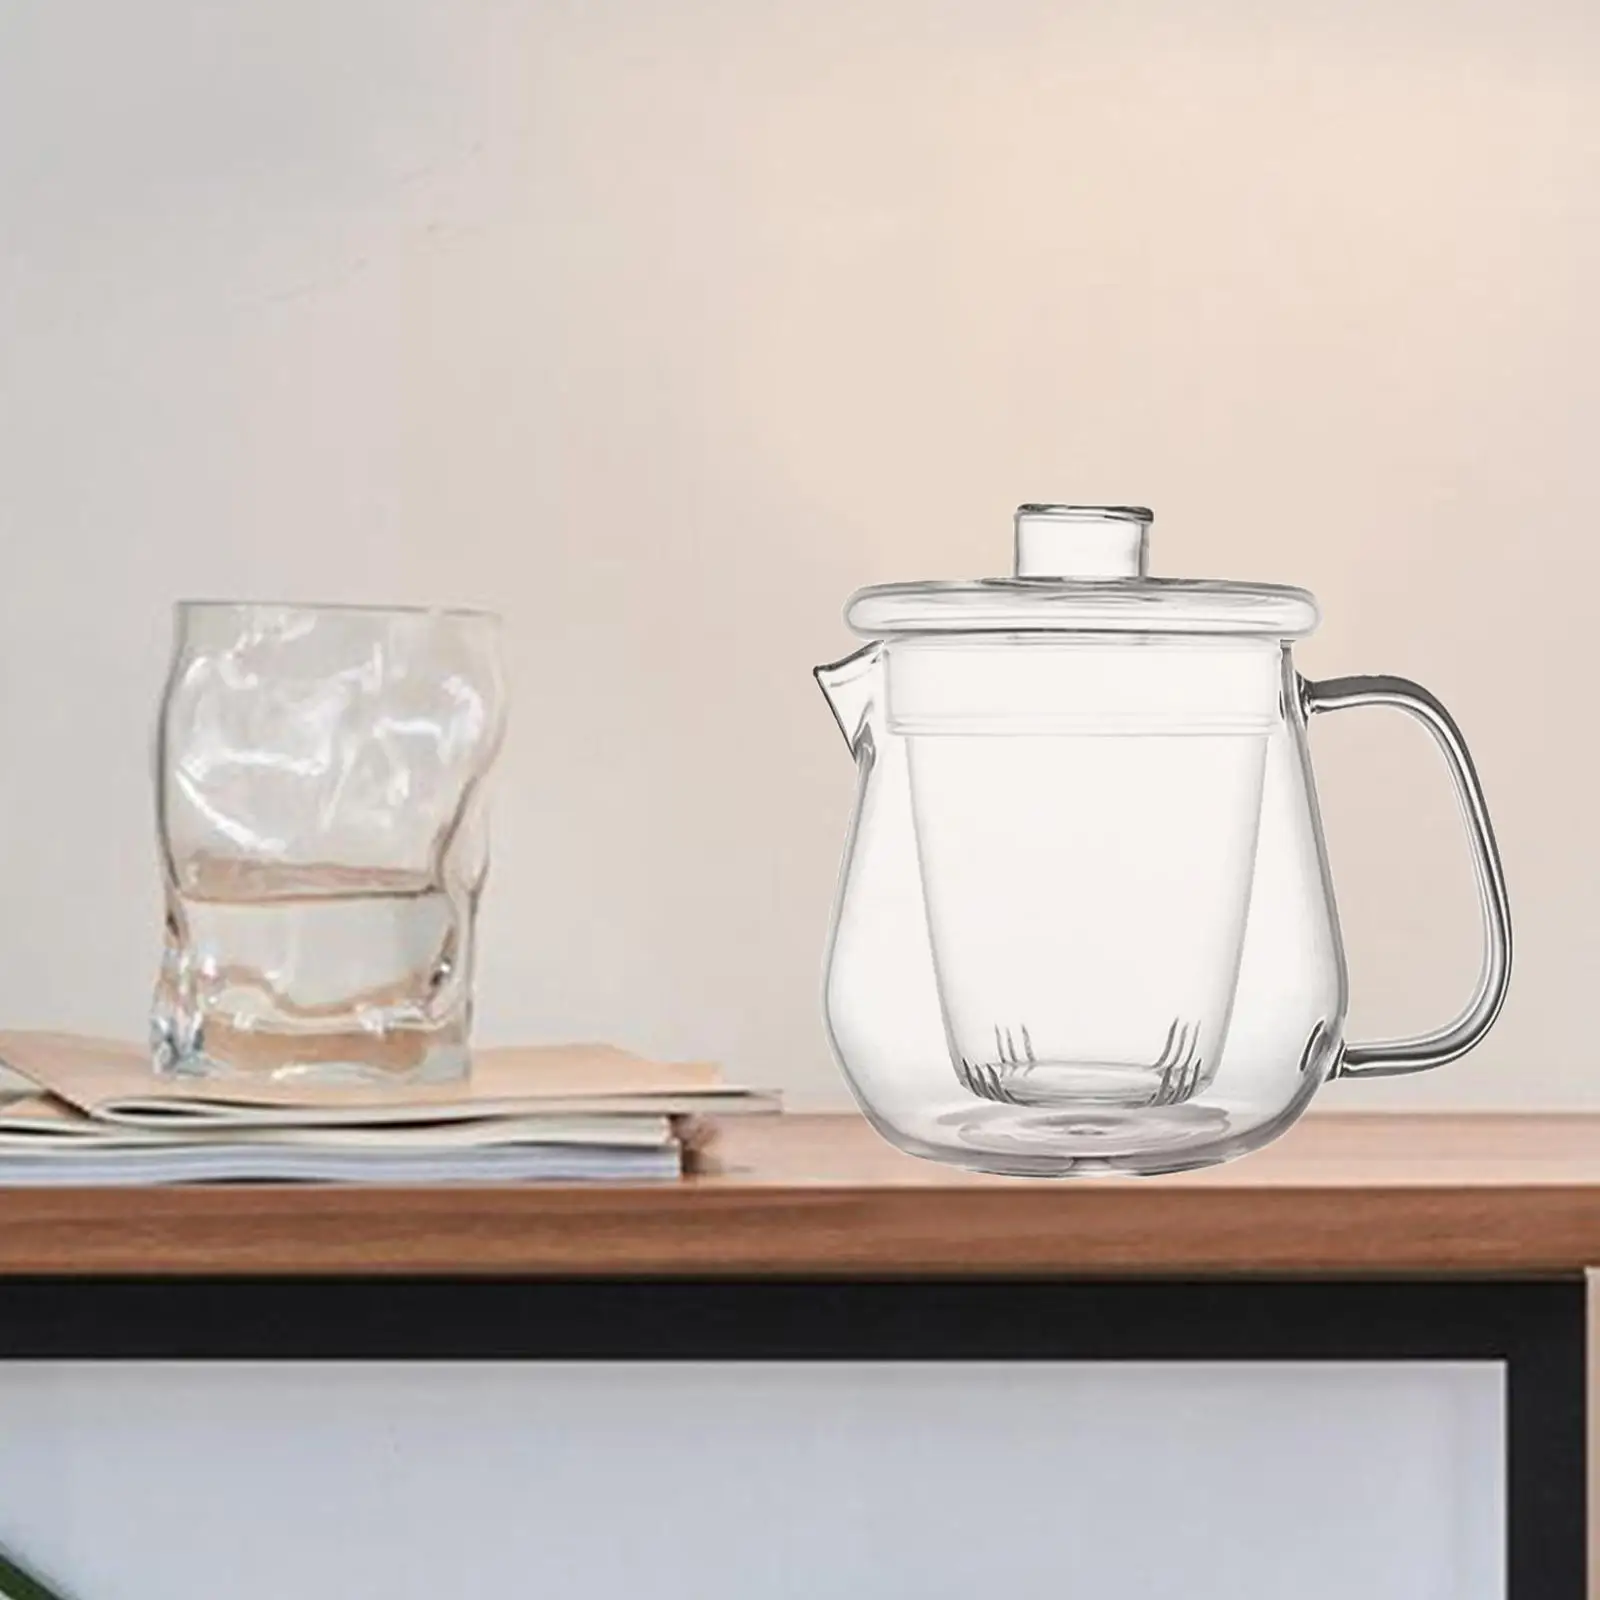 Glass Teapot with Removable Infuser Microwave Safe Blooming Tea Maker Iced Tea  Pitcher Glass Carafe Tea